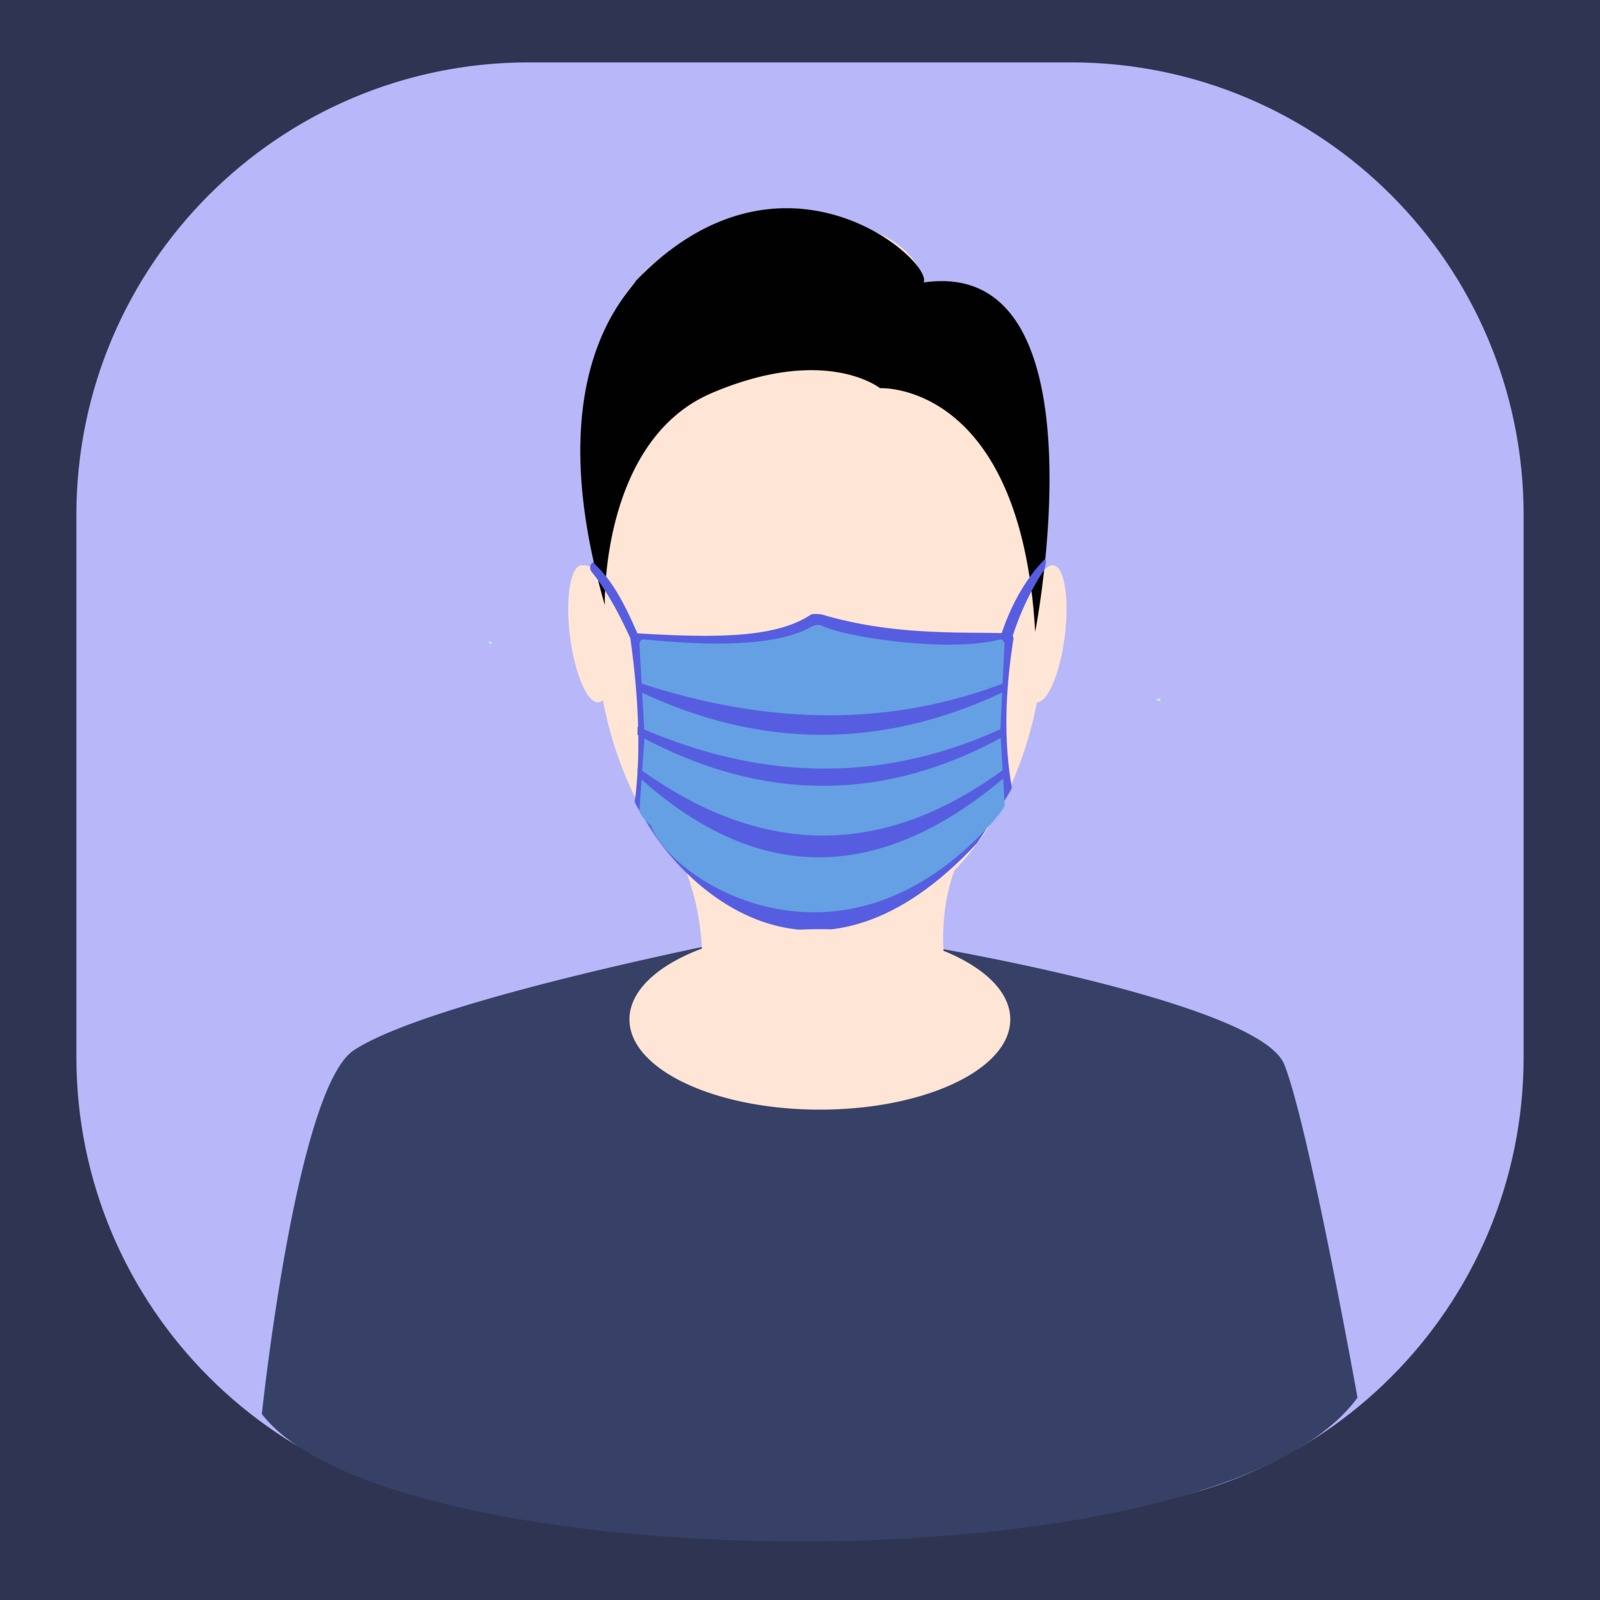 Man wearing hygienic mask to safety,vector flat illustration by ardeann